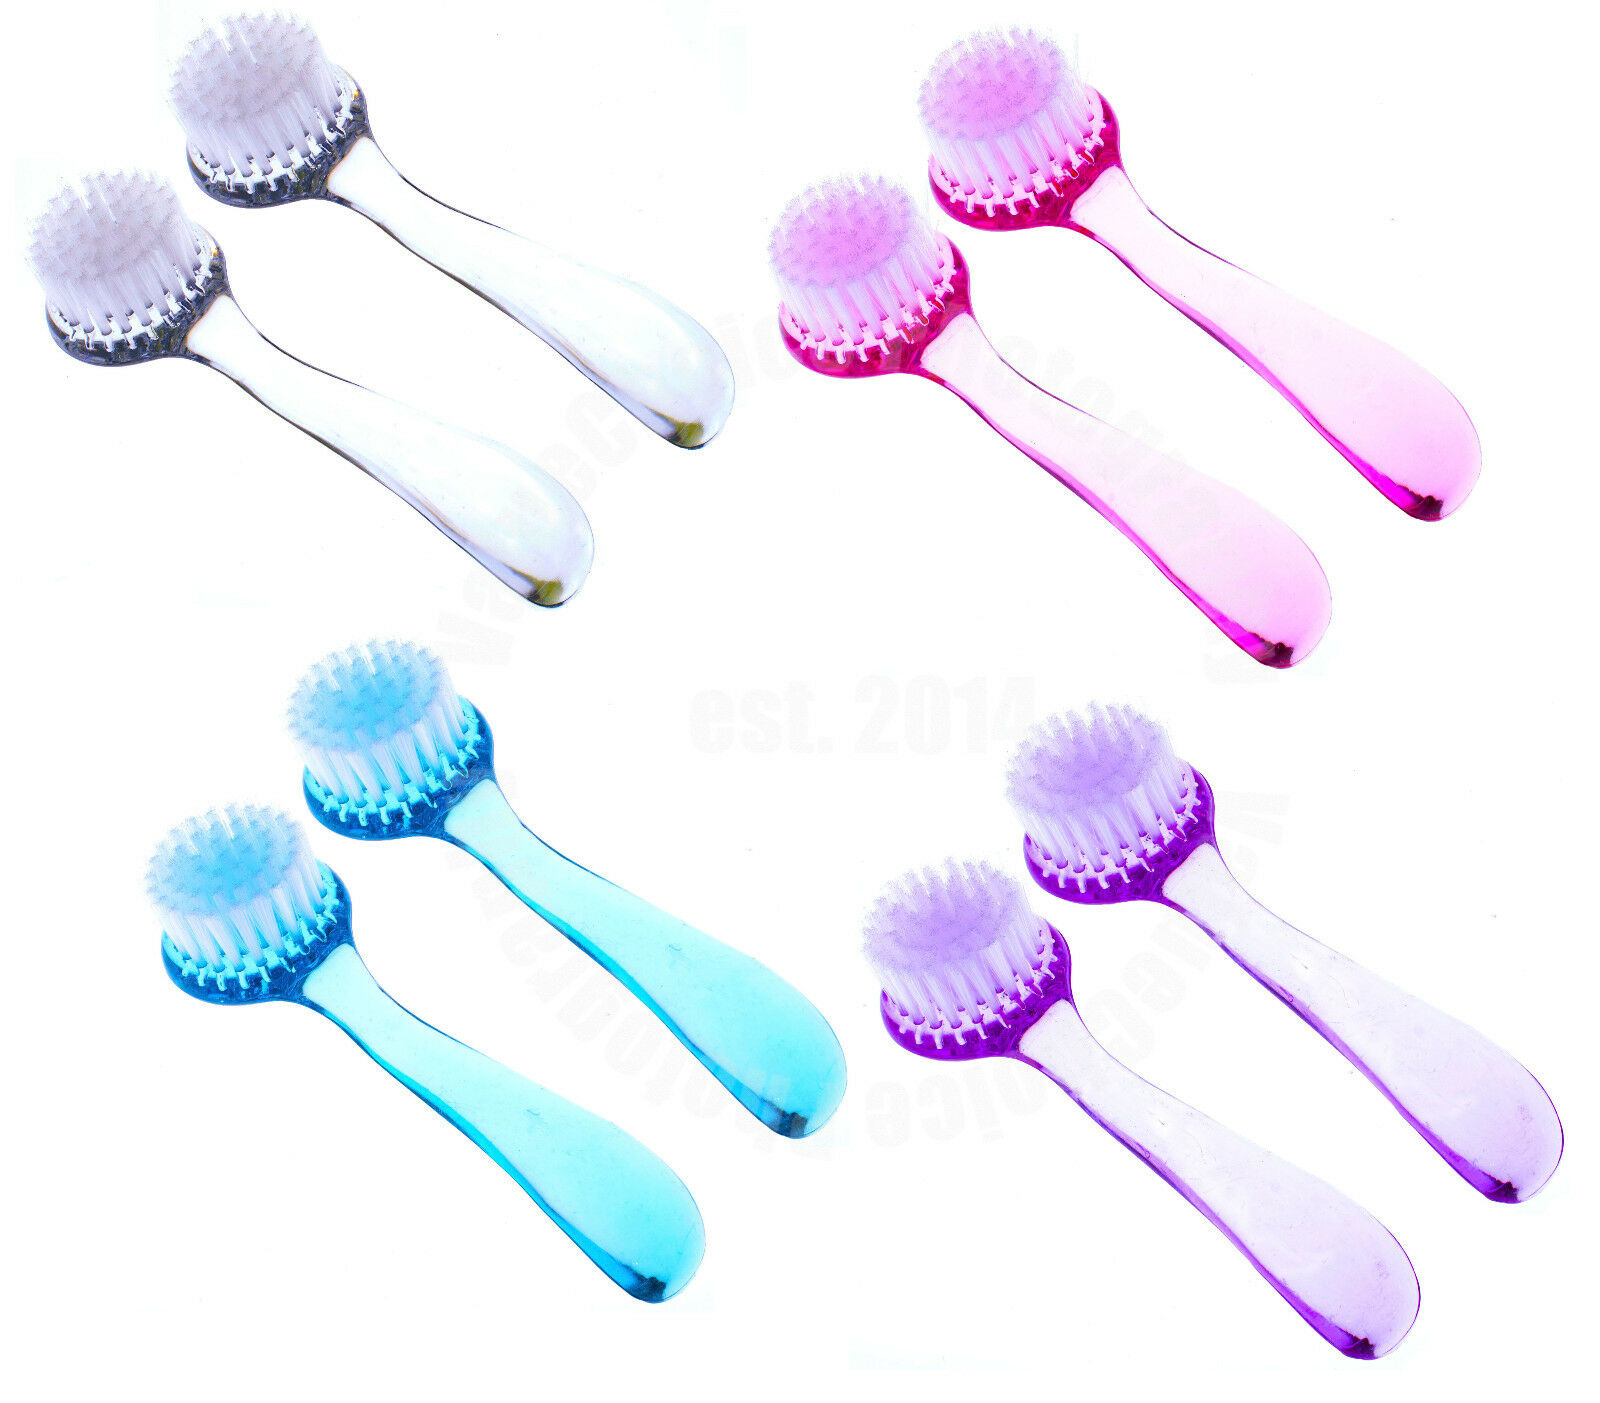 2 Pcs Face Facial Cleansing Brush Scrub Care Cleaning Soft Bristle Exfoliating